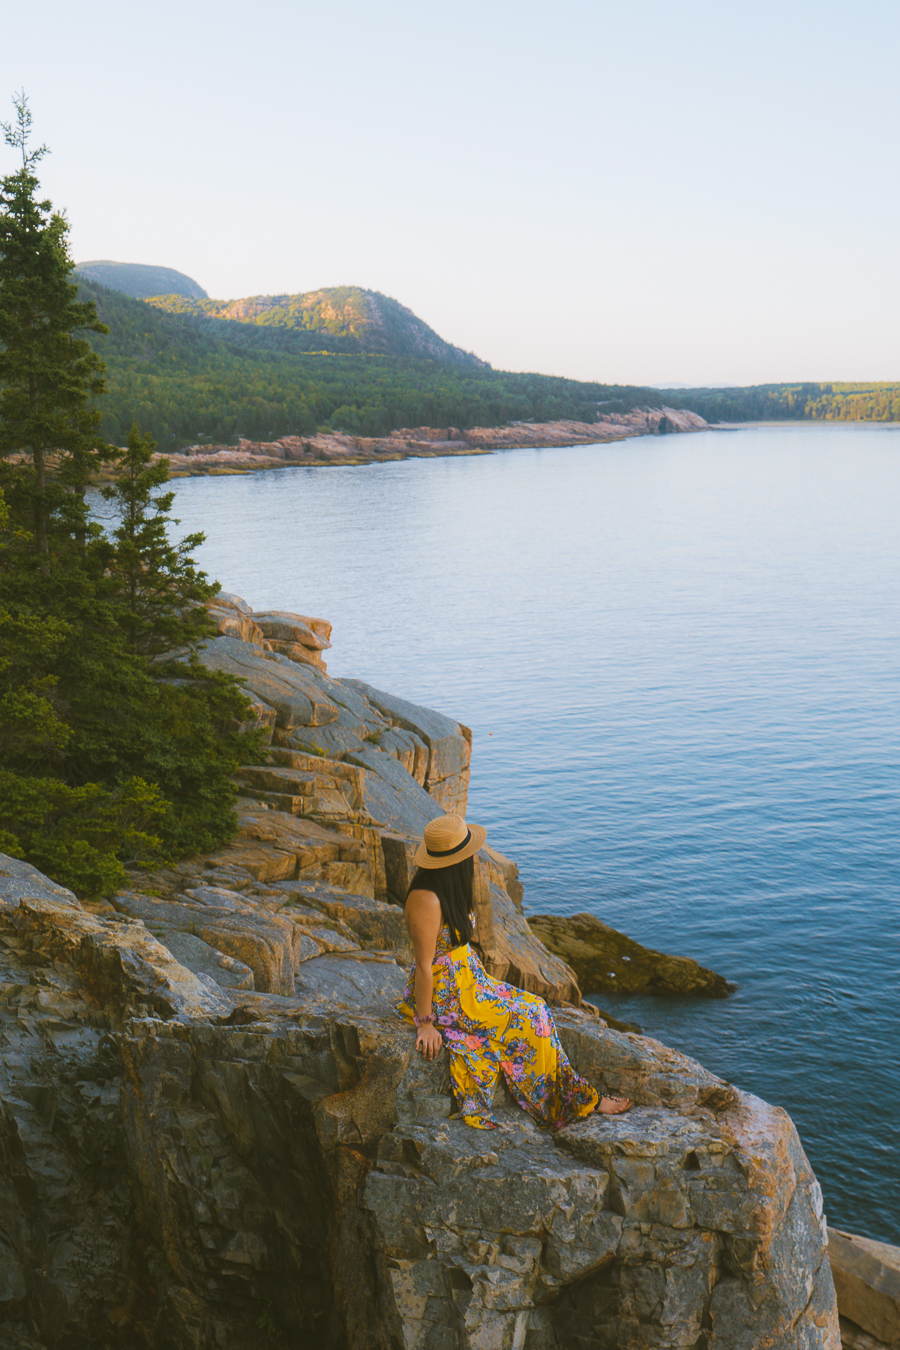 Where to Stay in Acadia National Park